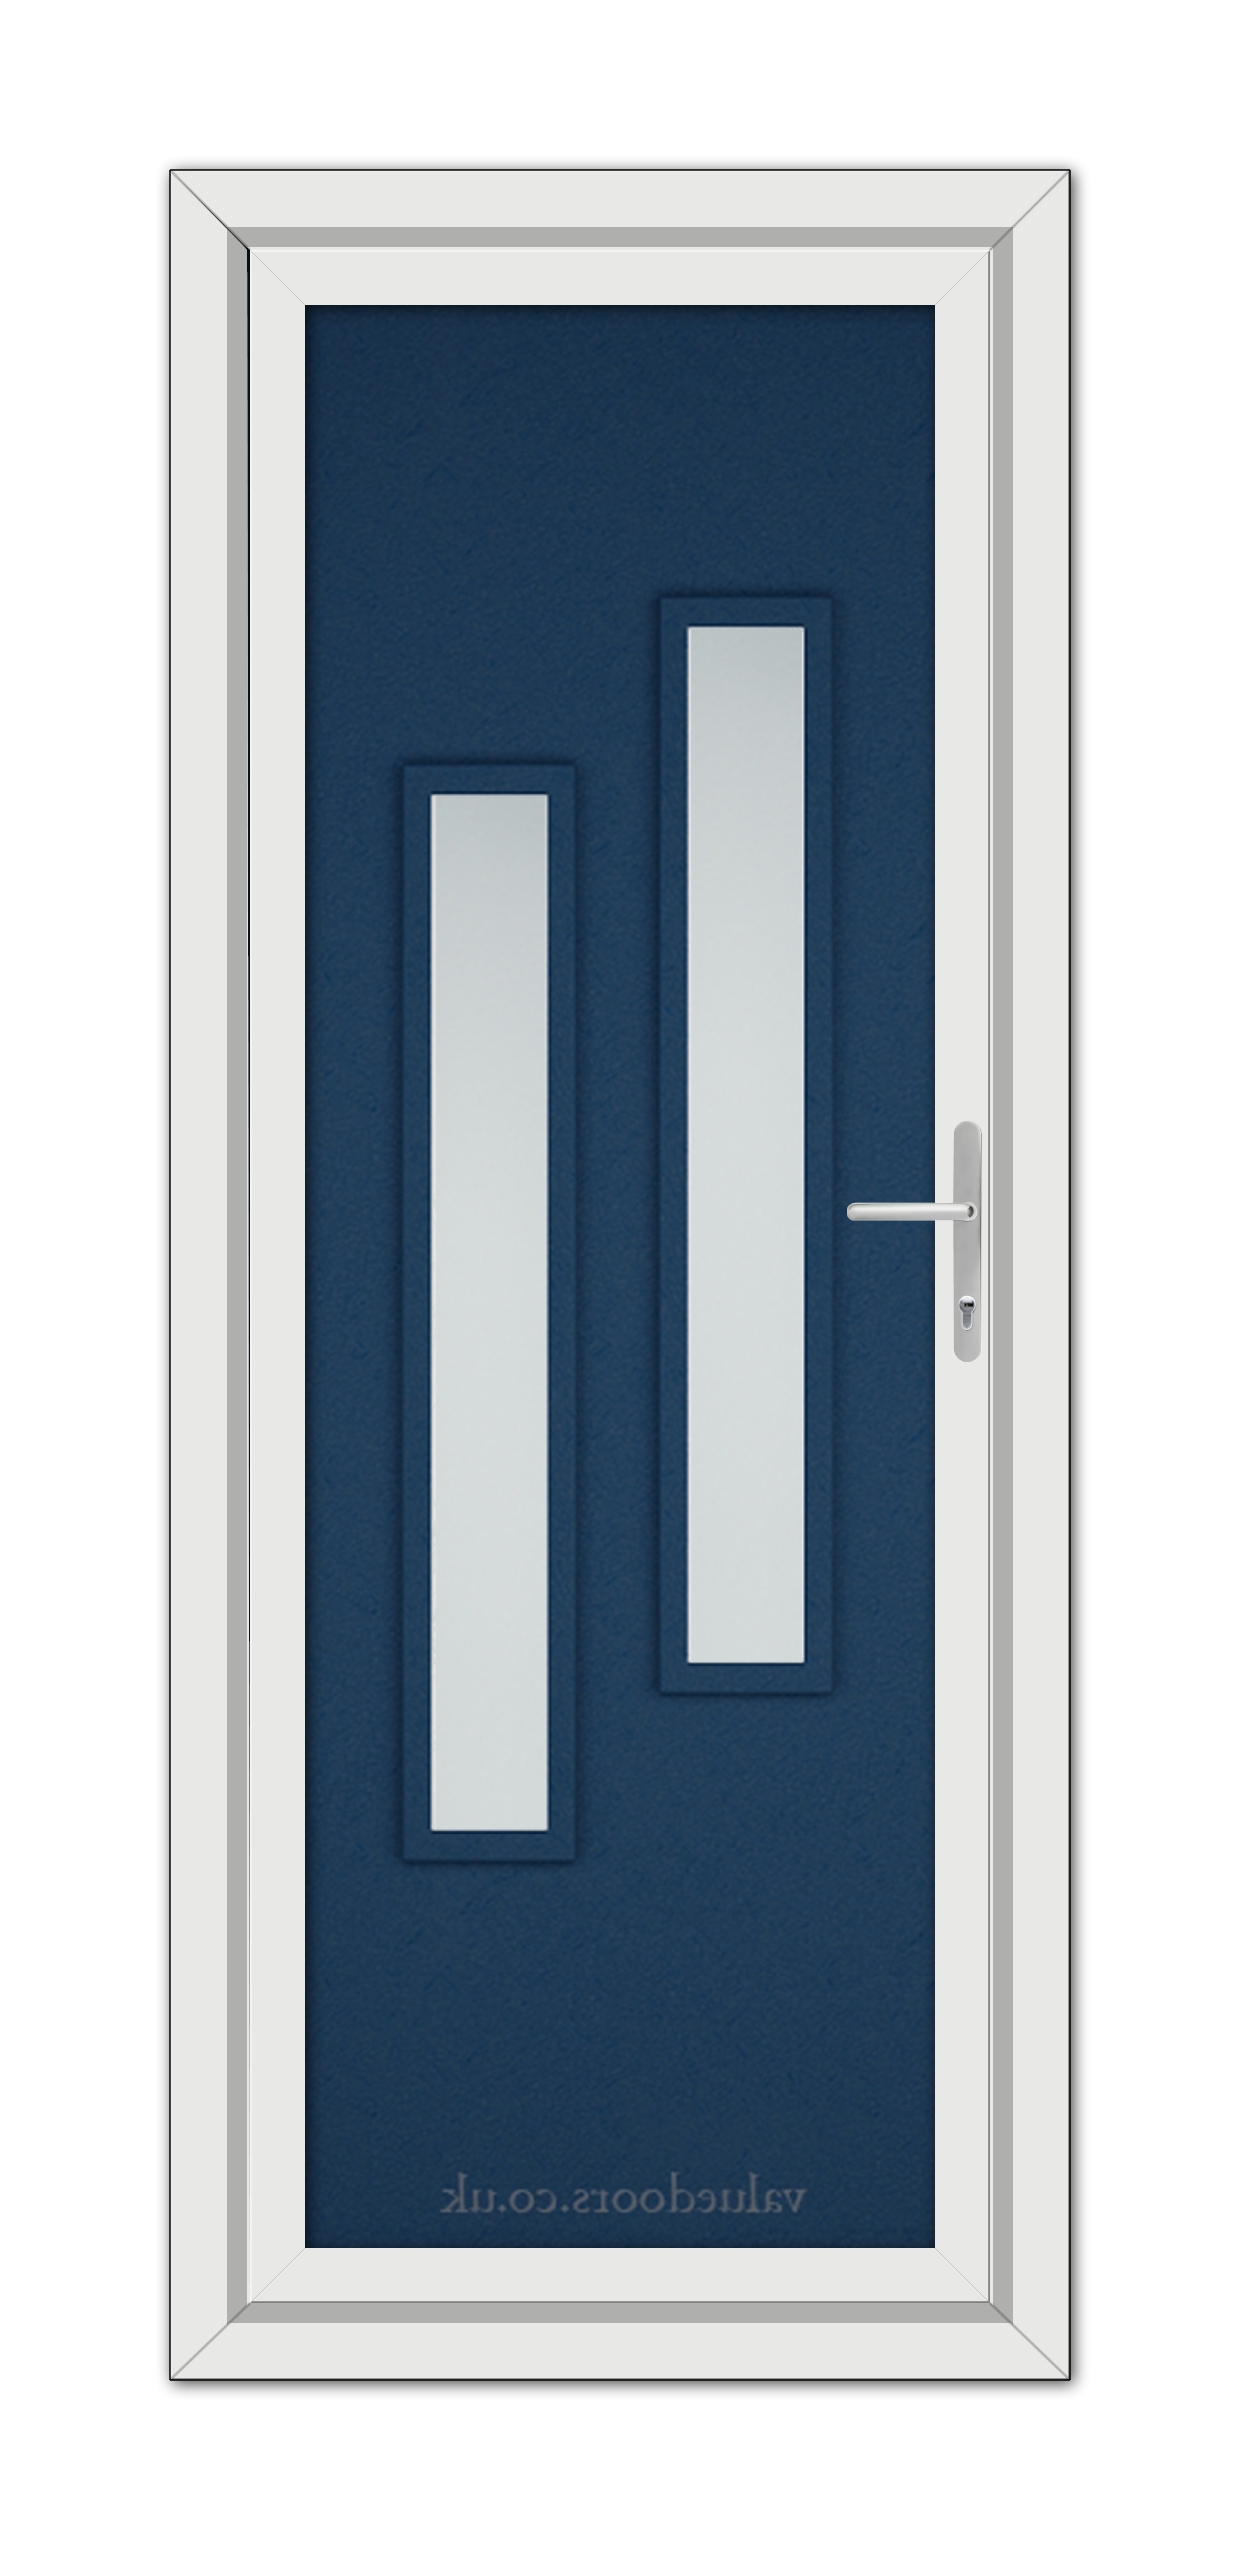 A Blue Modern 5082 uPVC Door with a white frame, featuring a navy blue panel and two vertical, rectangular glass windows.